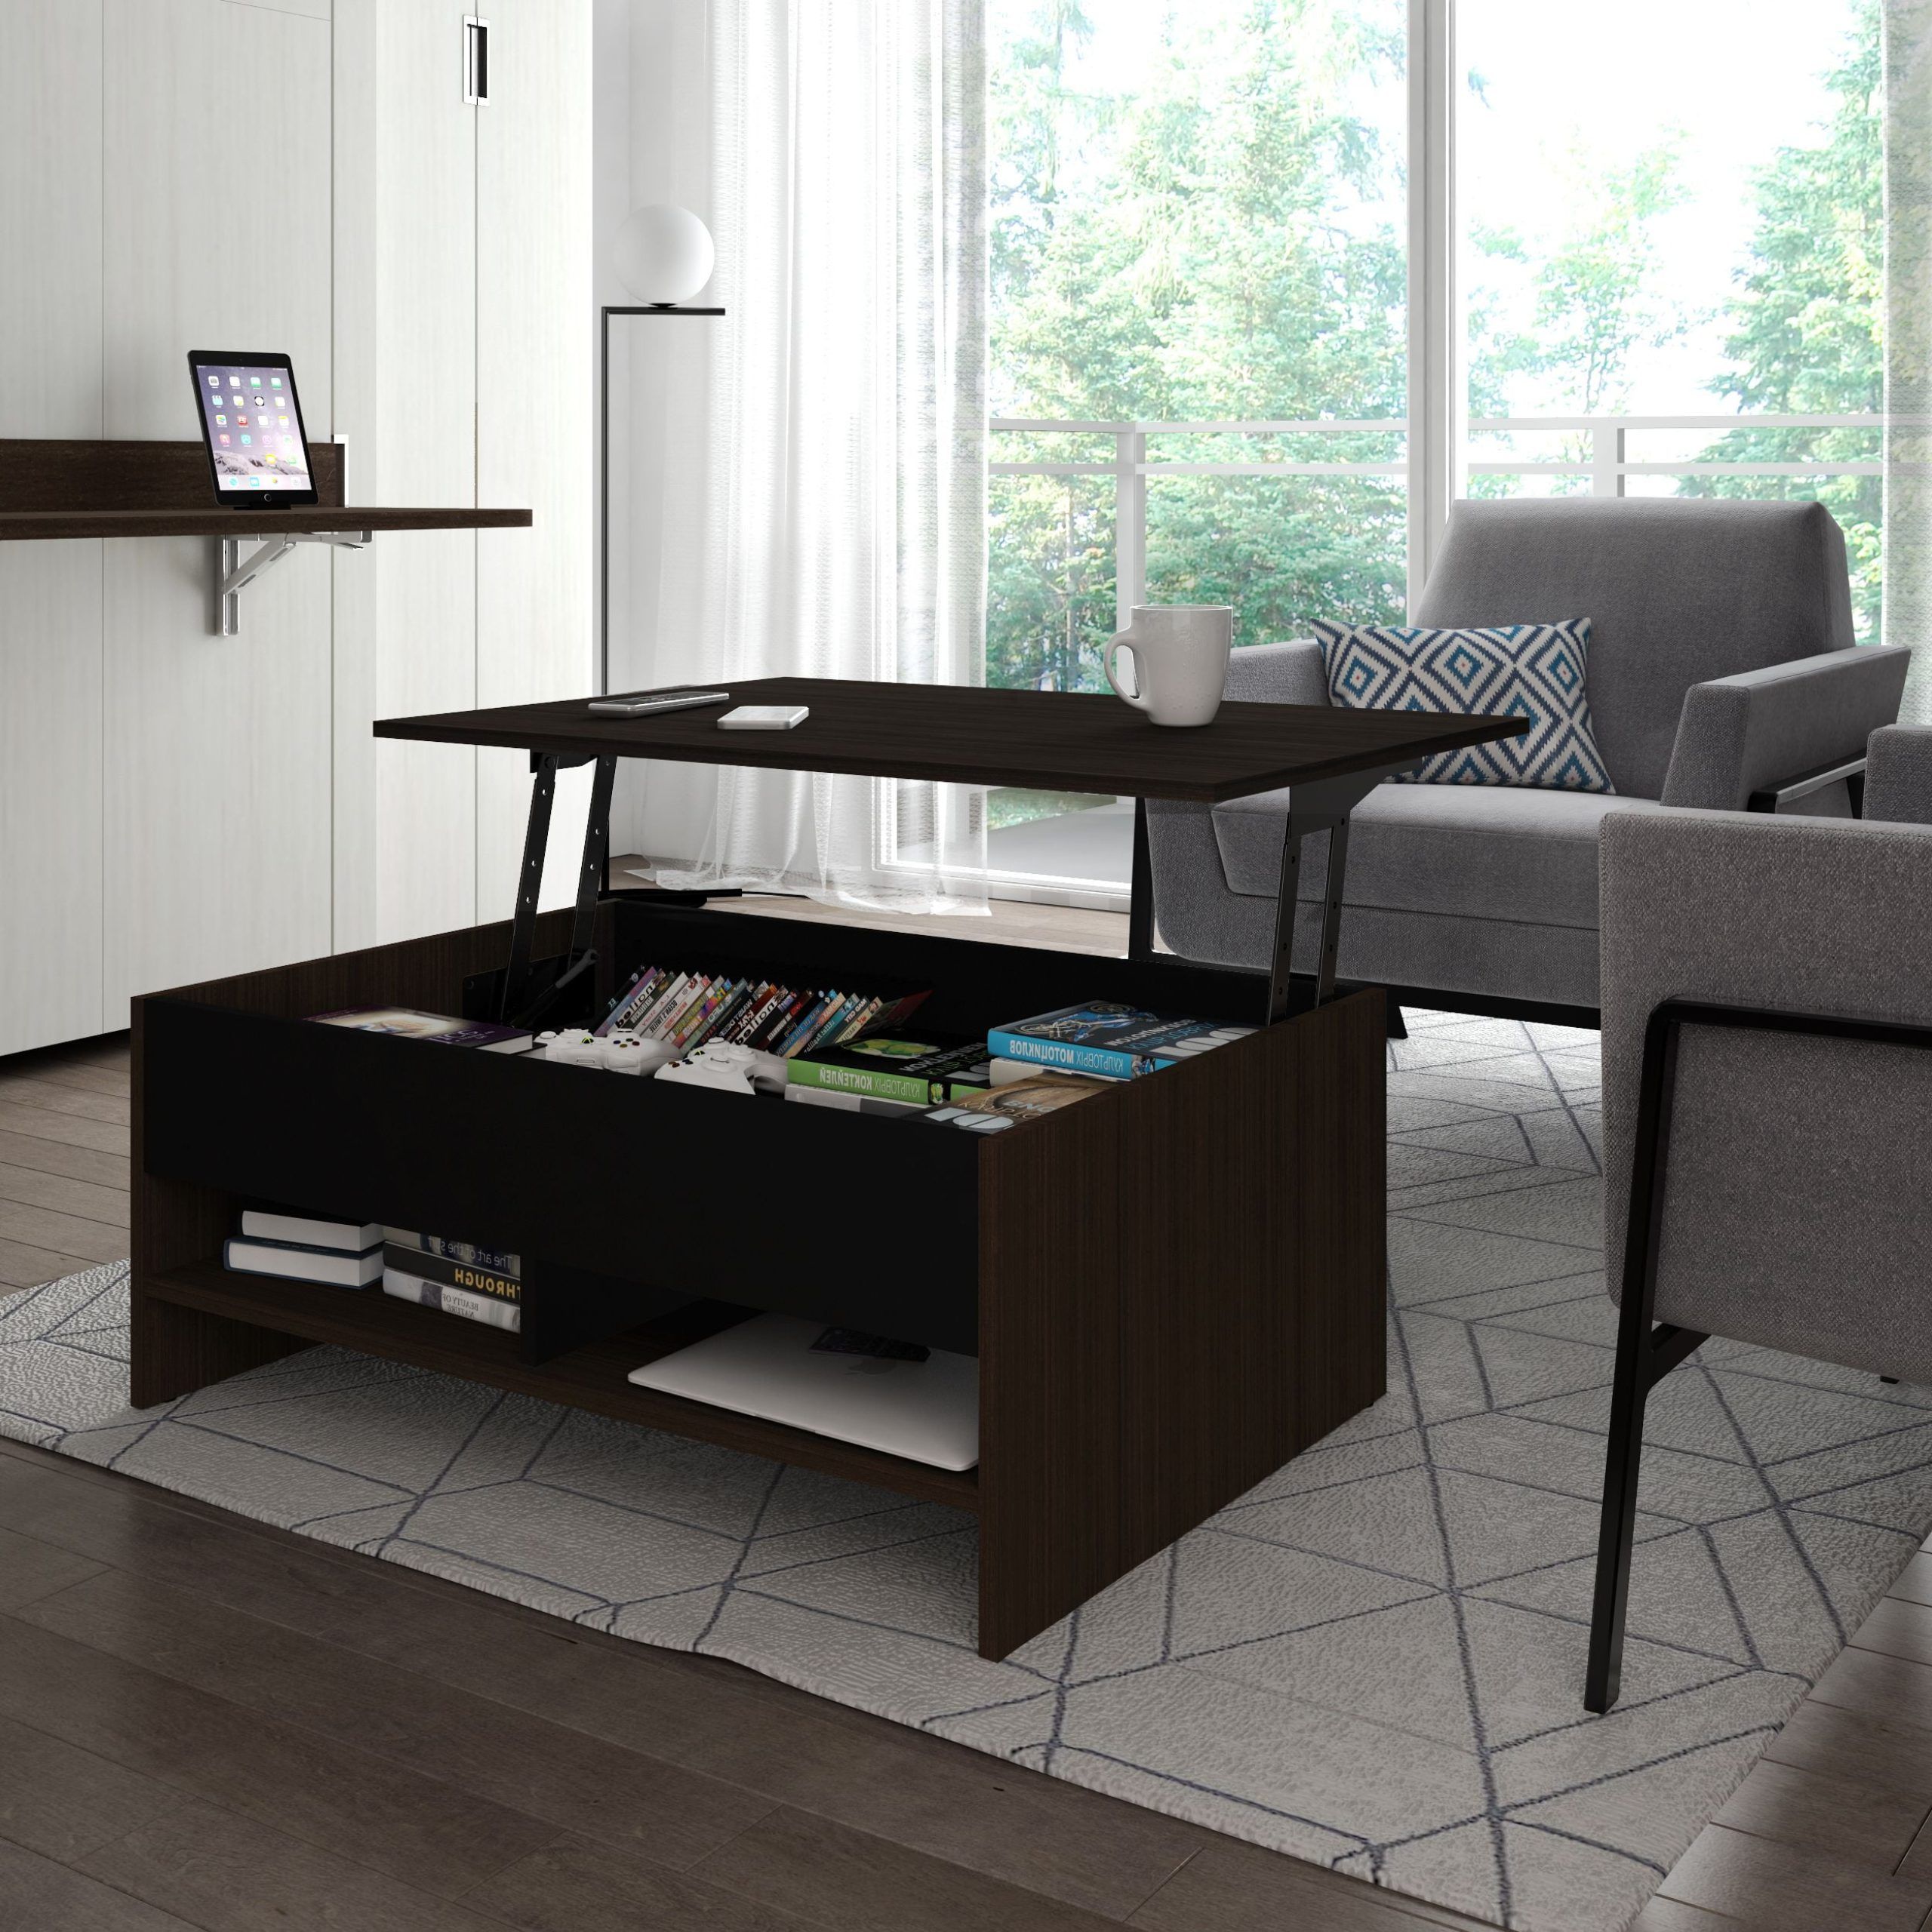 2019 Lift Top Coffee Tables With Storage For Bestar Small Space Lift Top Storage Coffee Table – Walmart (View 11 of 15)